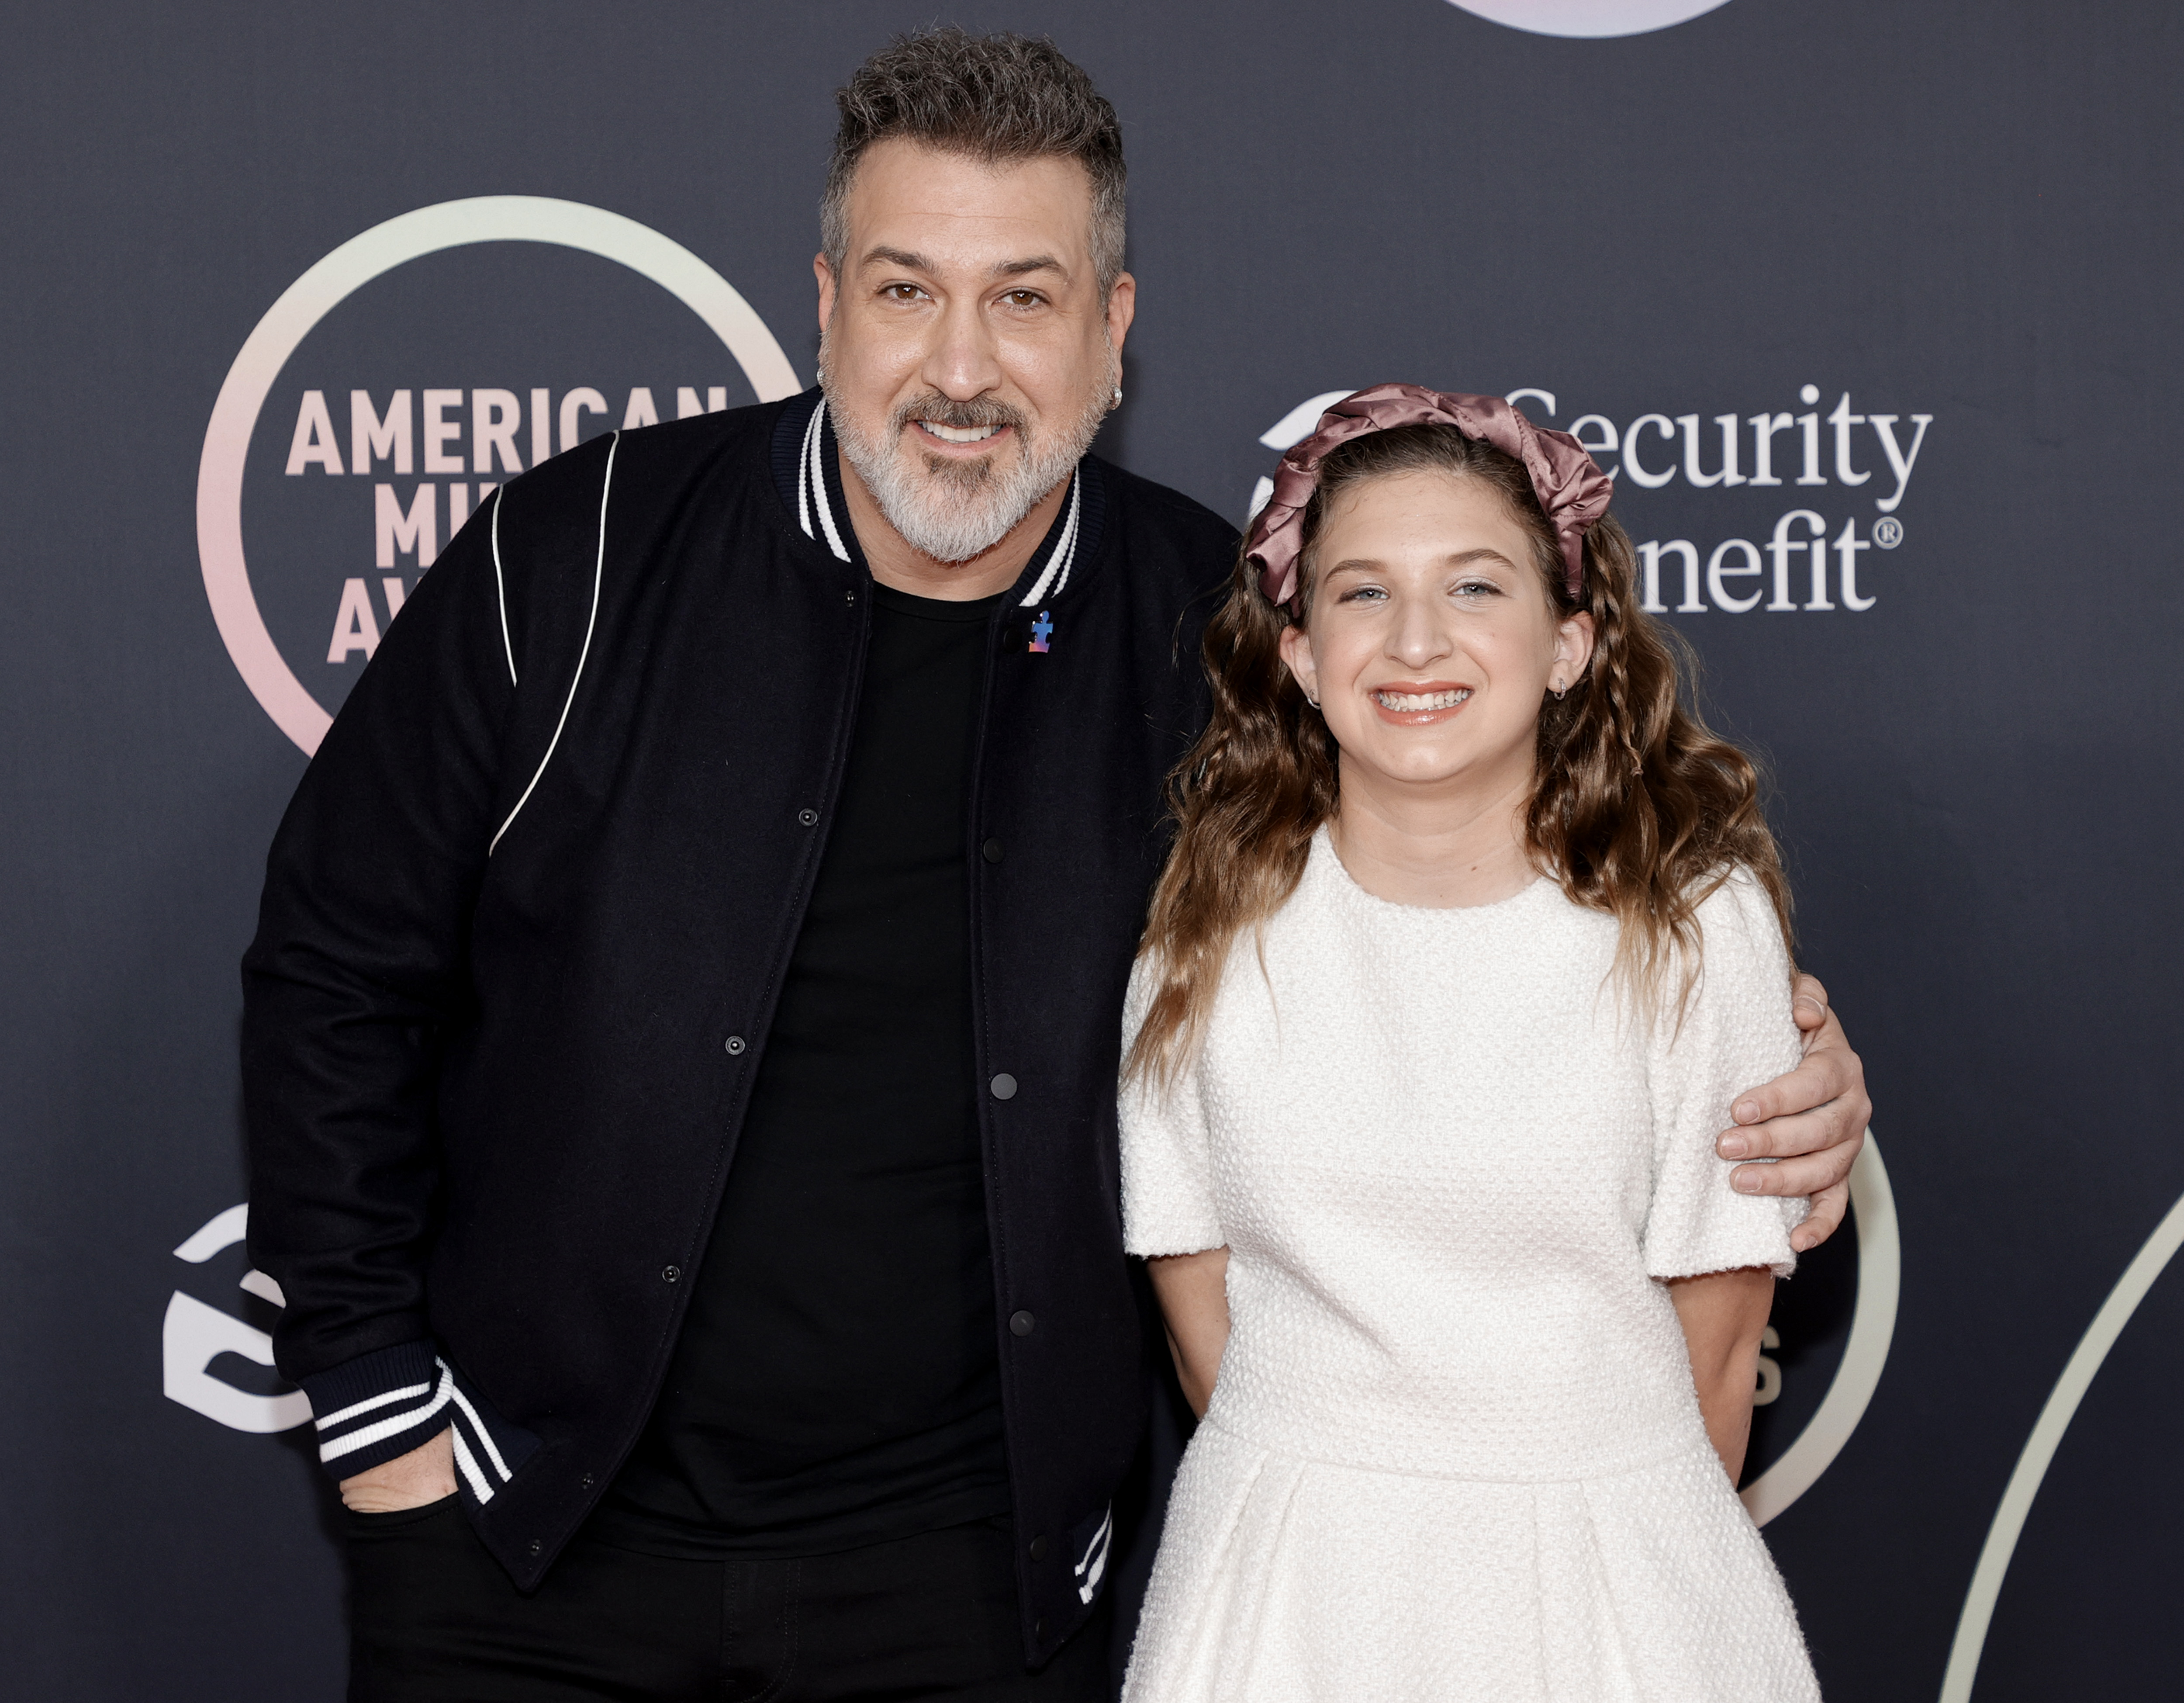 (L-R) Joey Fatone of NSYNC and Kloey Alexandra attend the 2021 American Music Awards at Microsoft Theater on November 21, 2021 in Los Angeles, California. | Source: Getty Images